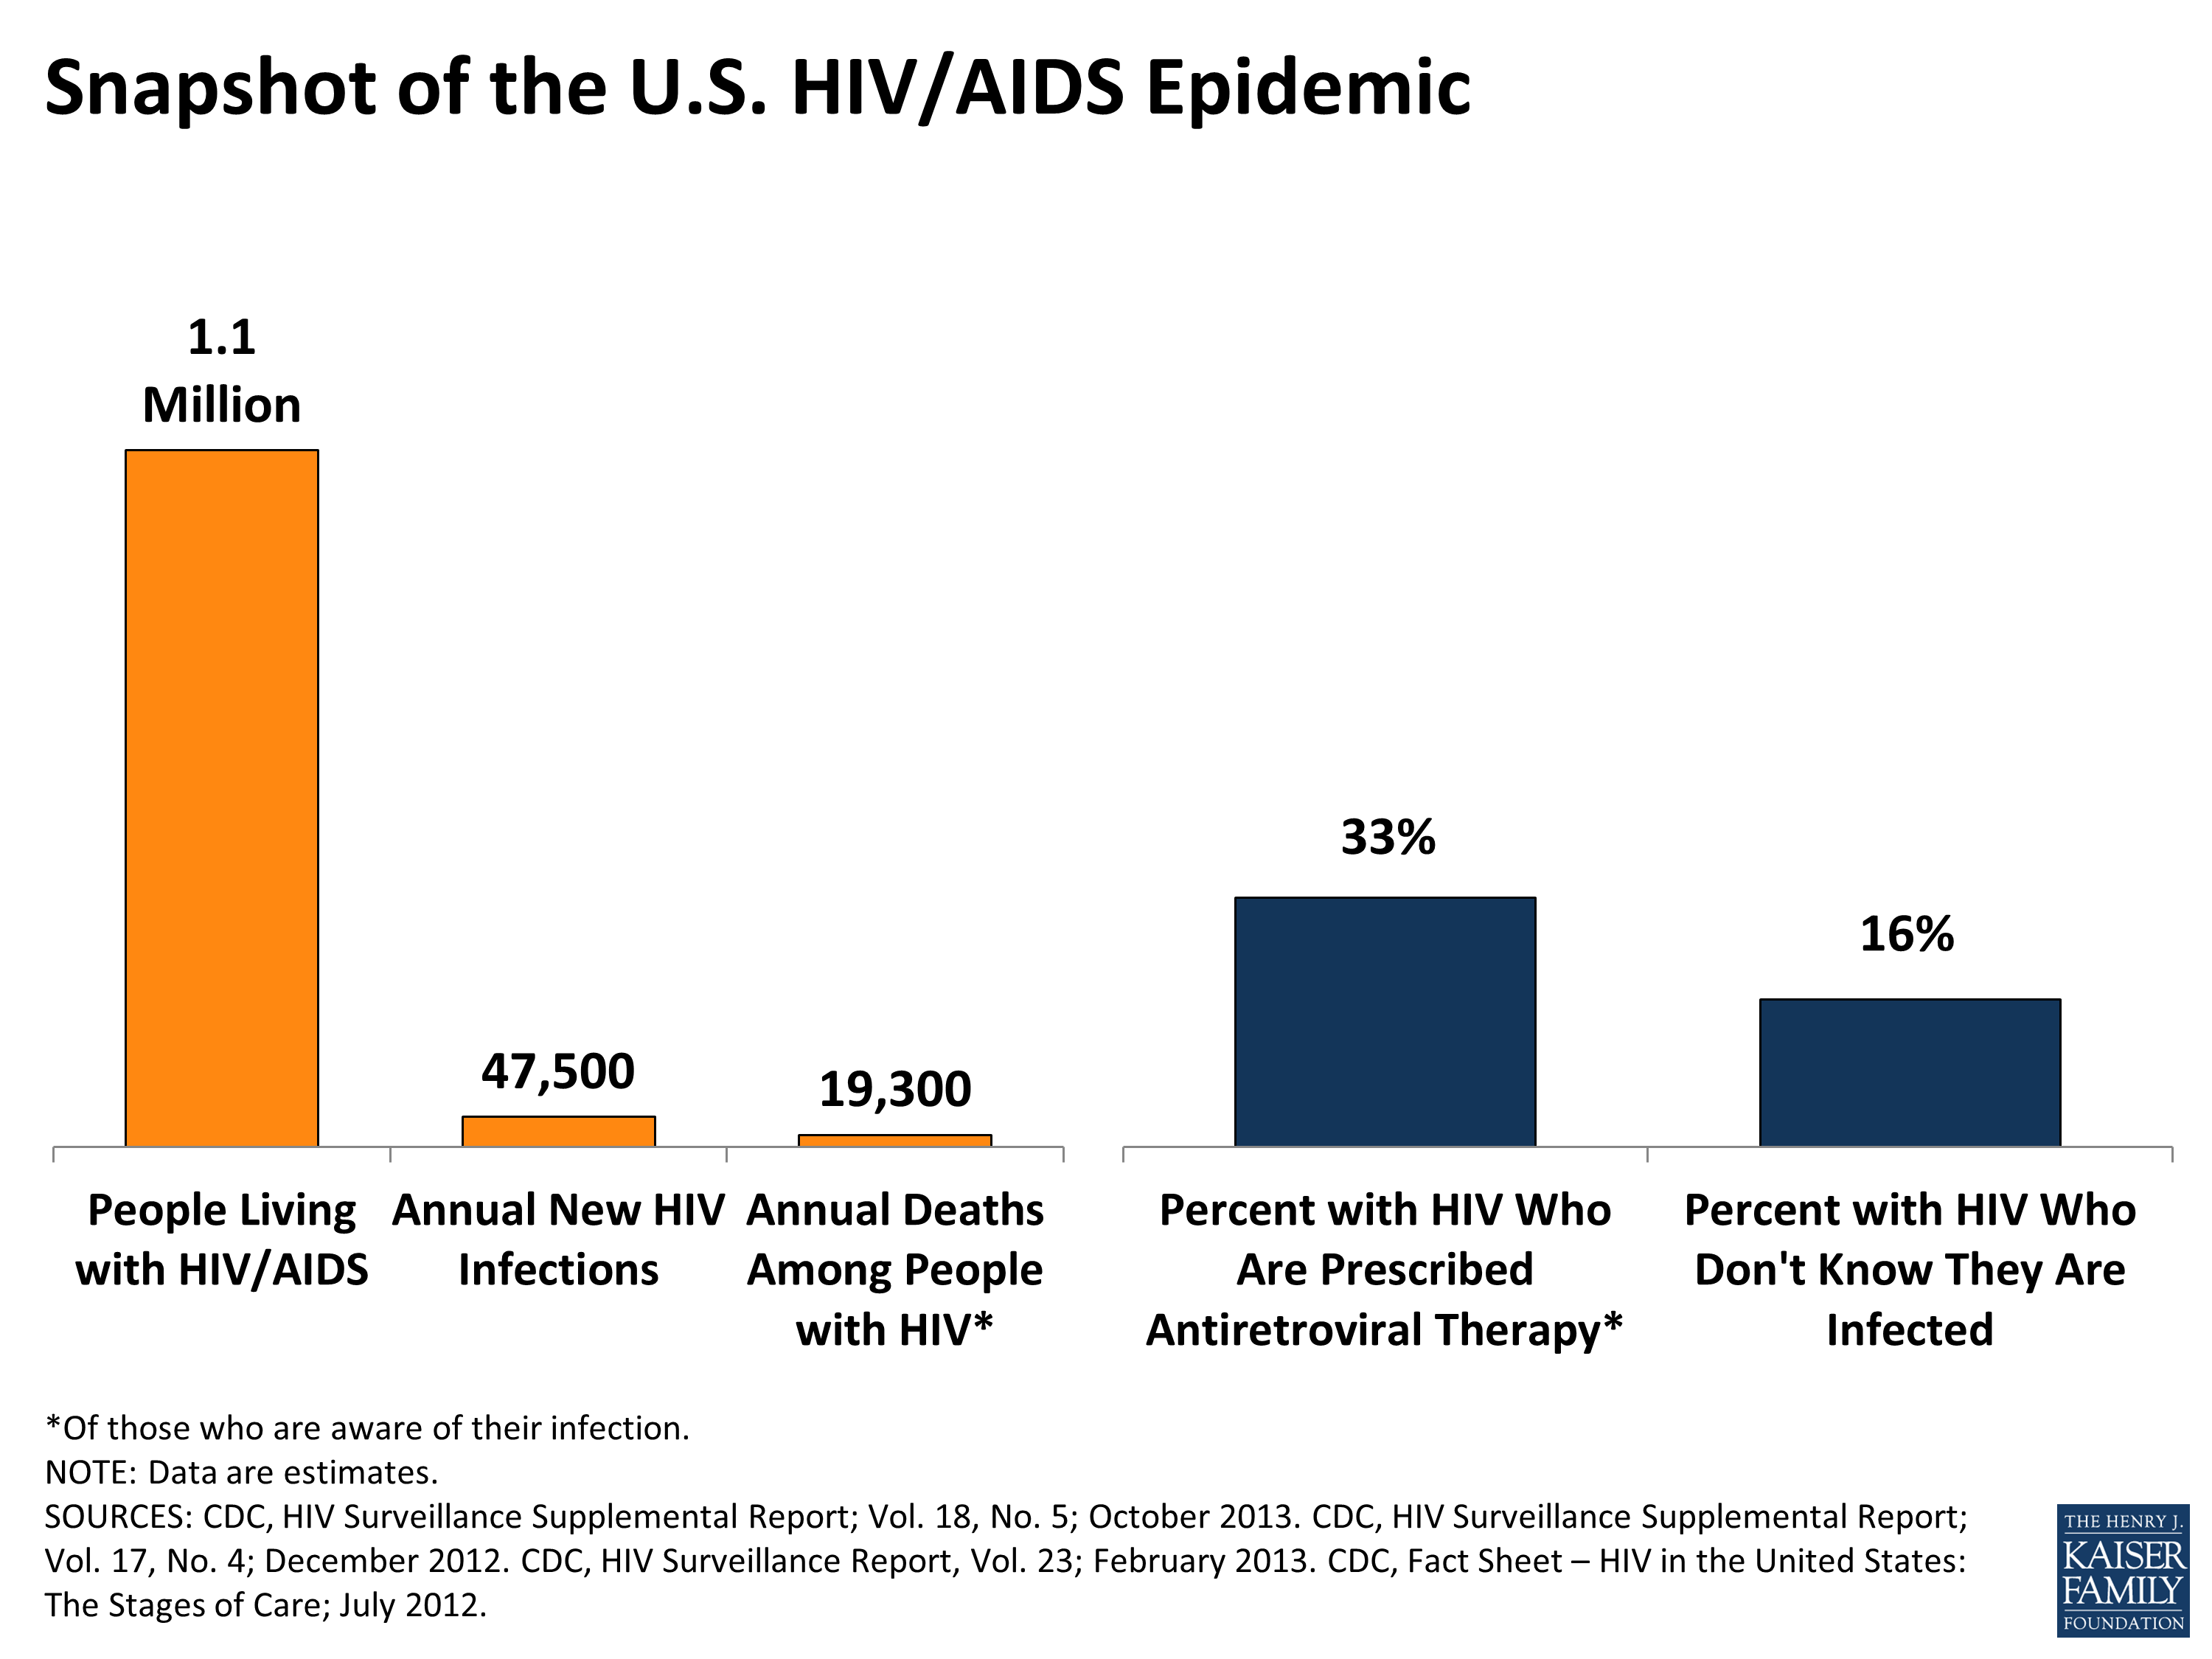 research topics about aids epidemic